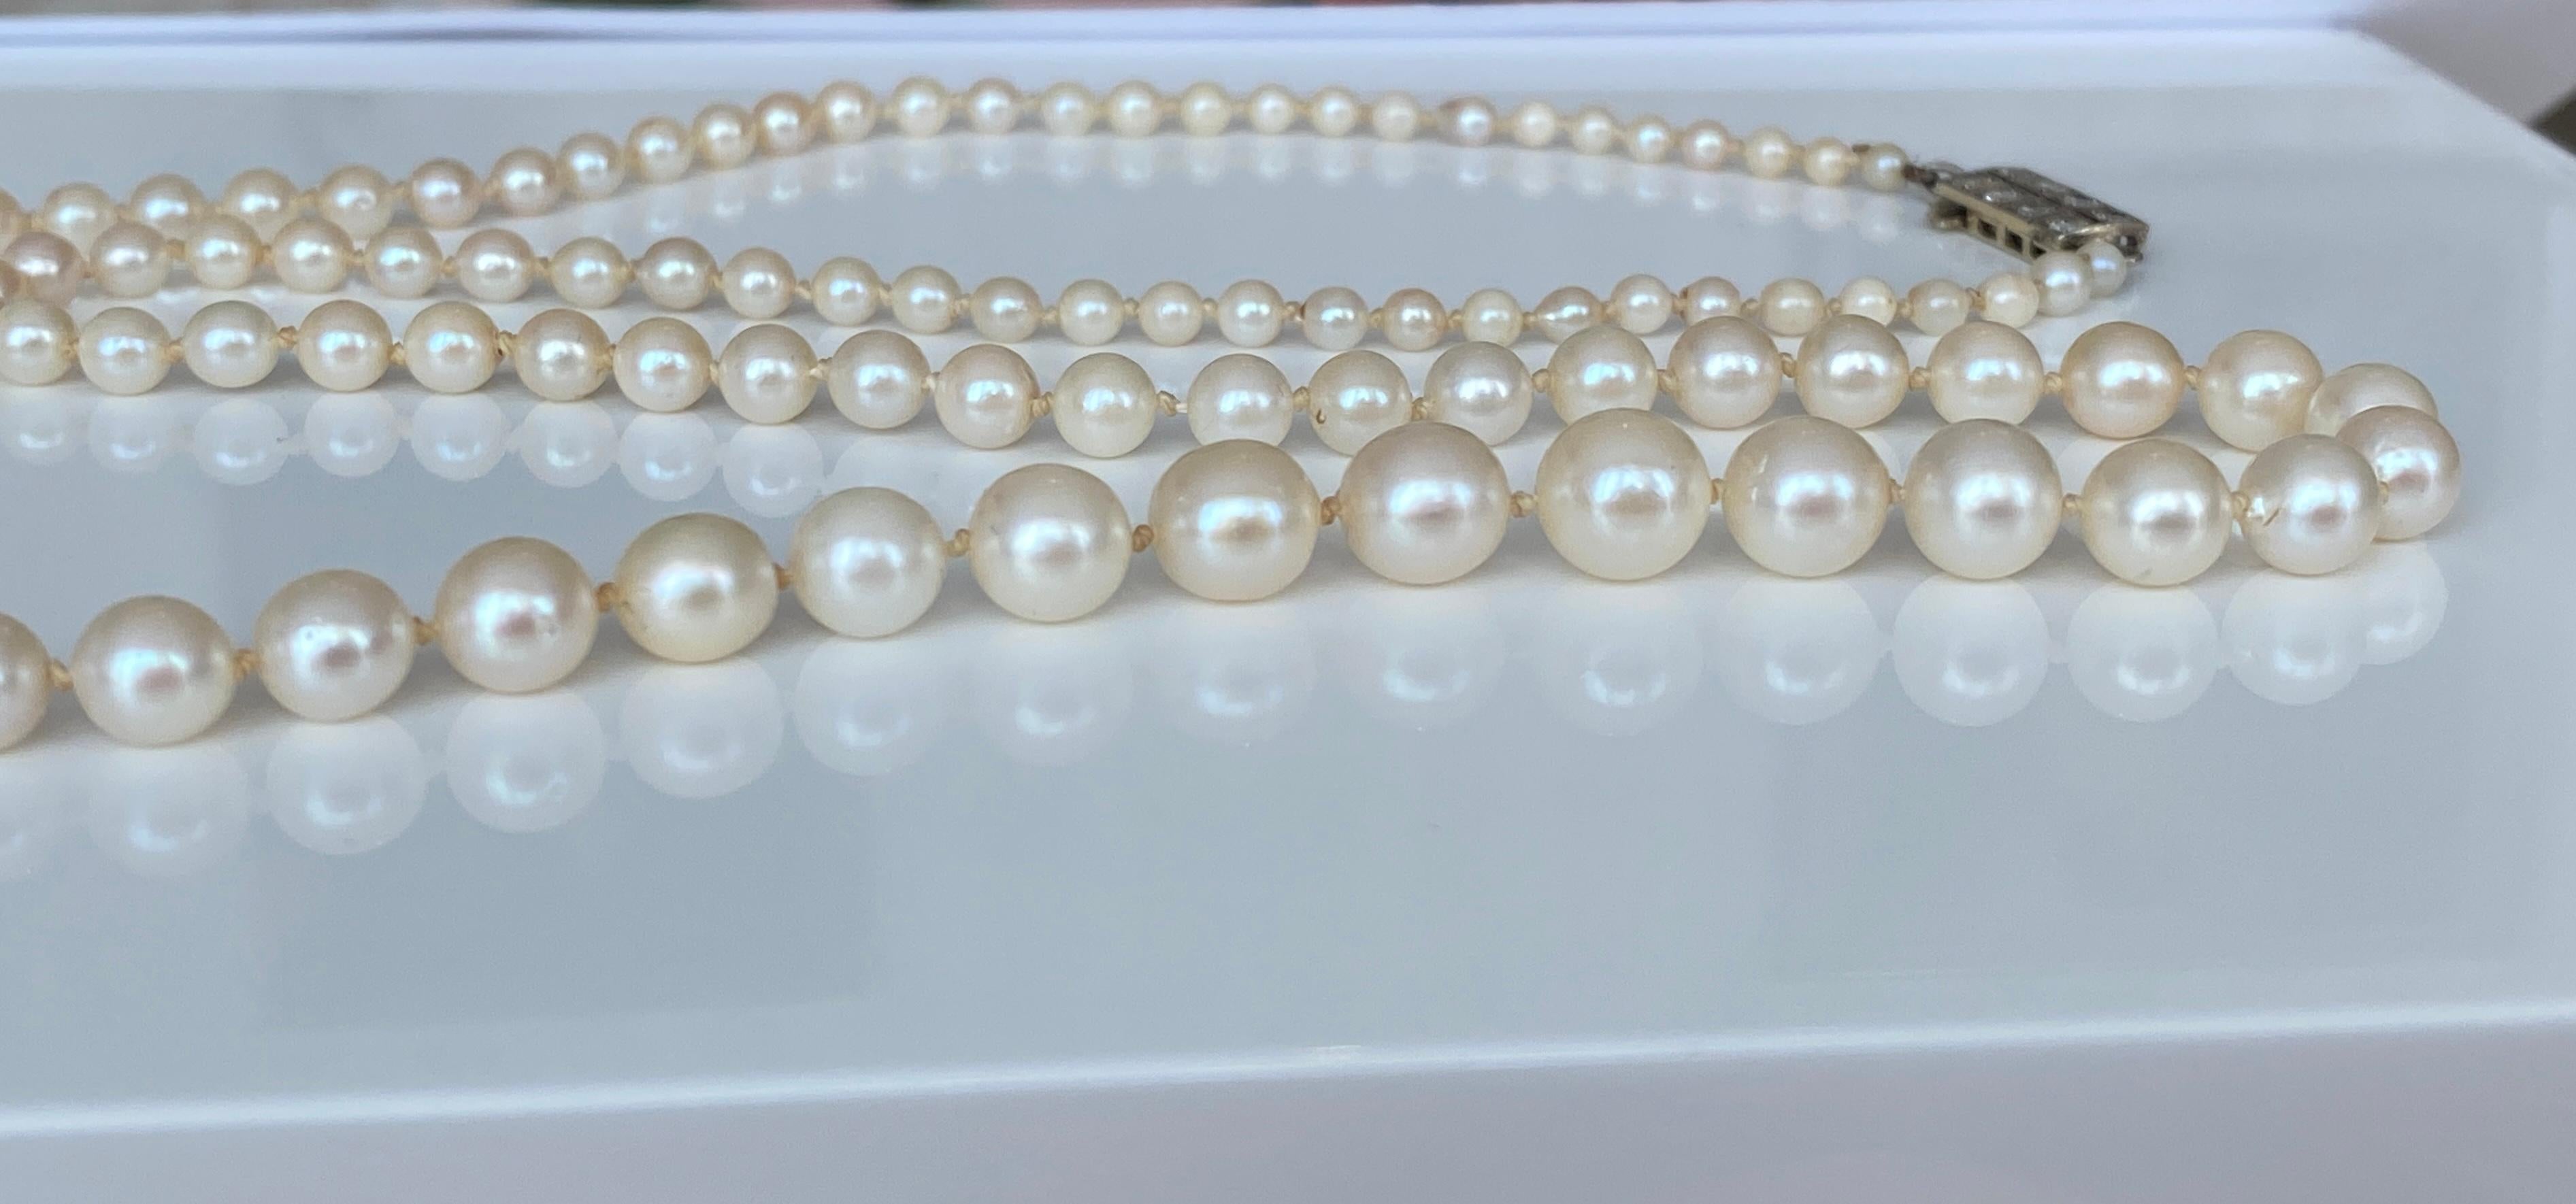 Pearl Necklace Art Deco Circa 1940s Cultured Akoya Pearls Diamond/Gold Clasp  For Sale 2